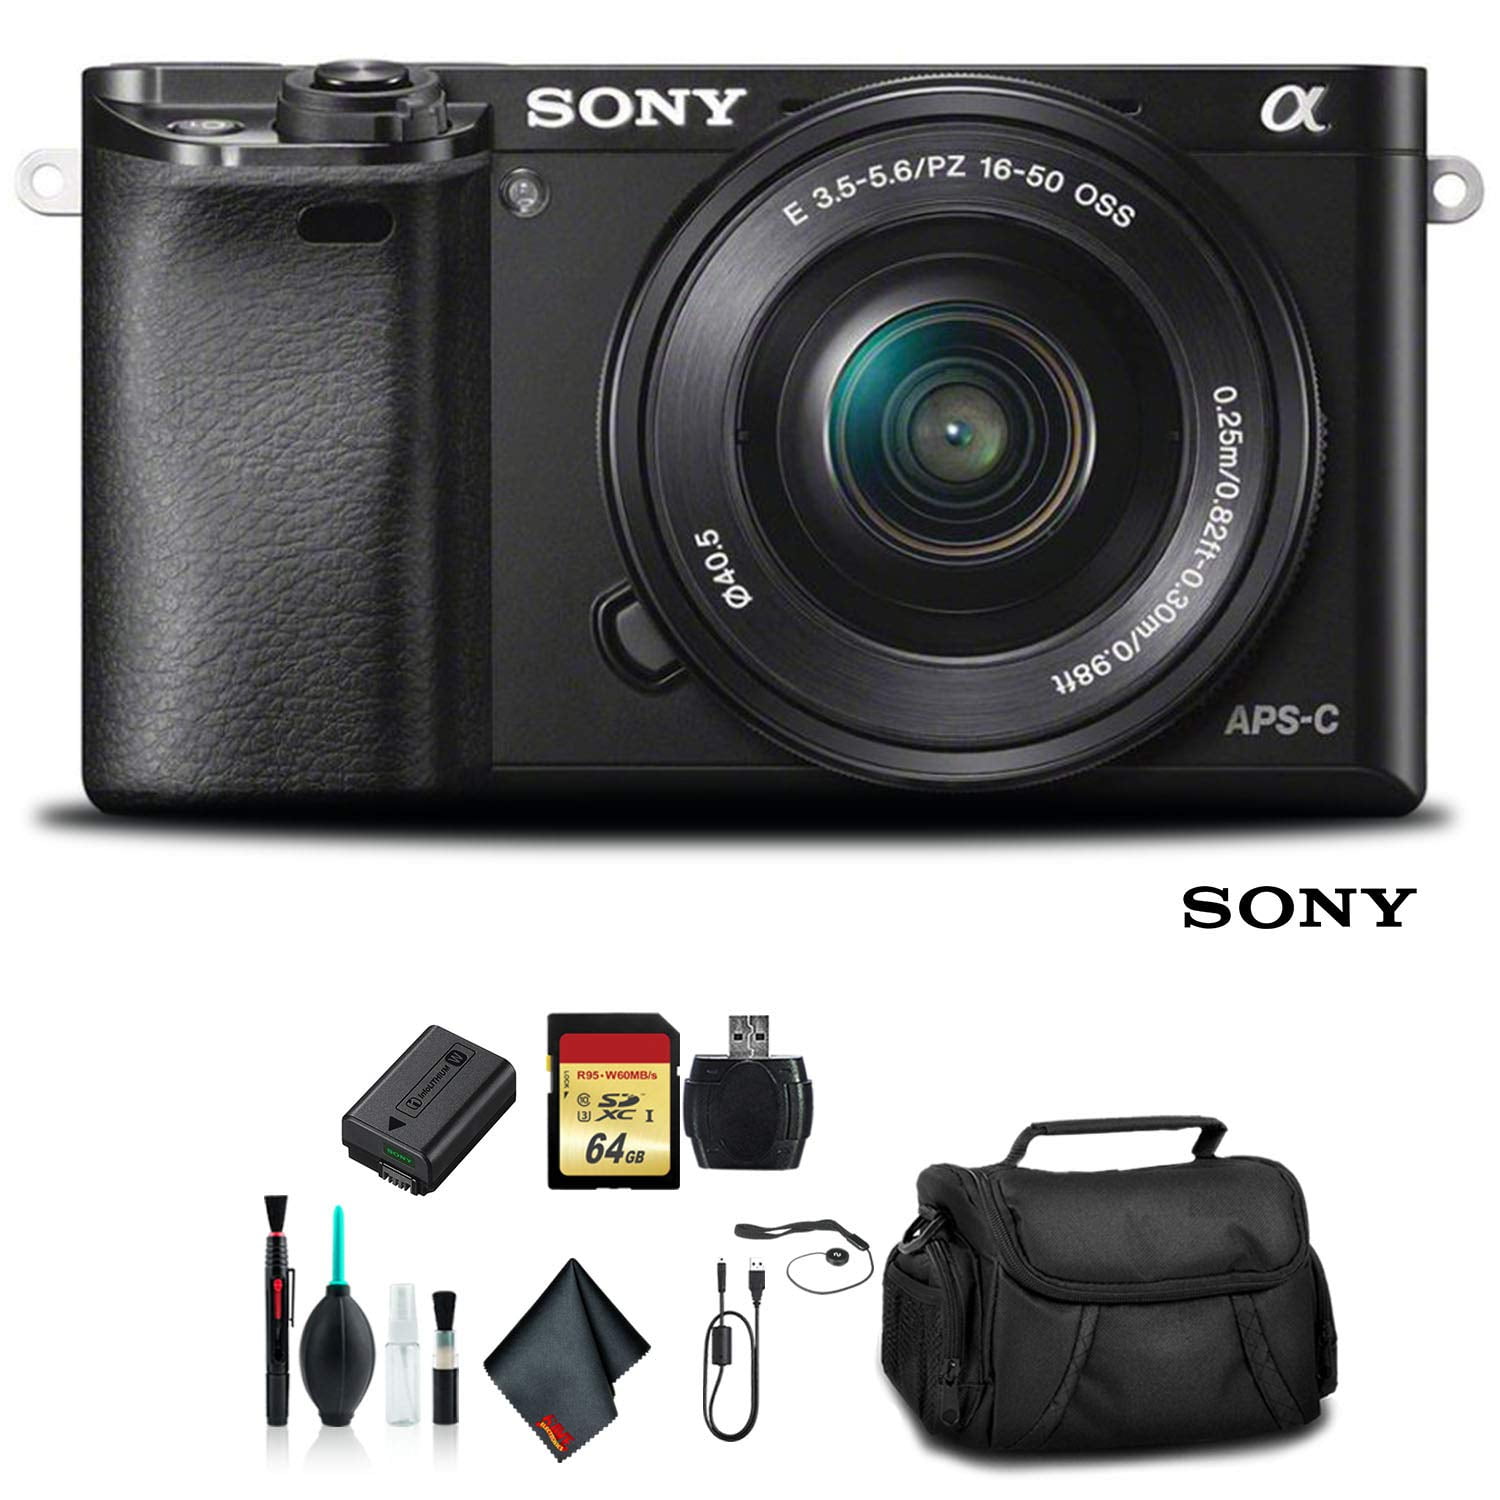 Sony Alpha a6000 Mirrorless Camera with 16-50mm Lens Black With Soft Bag, 64GB Memory Card , Plus Essential Accessories - Walmart.com